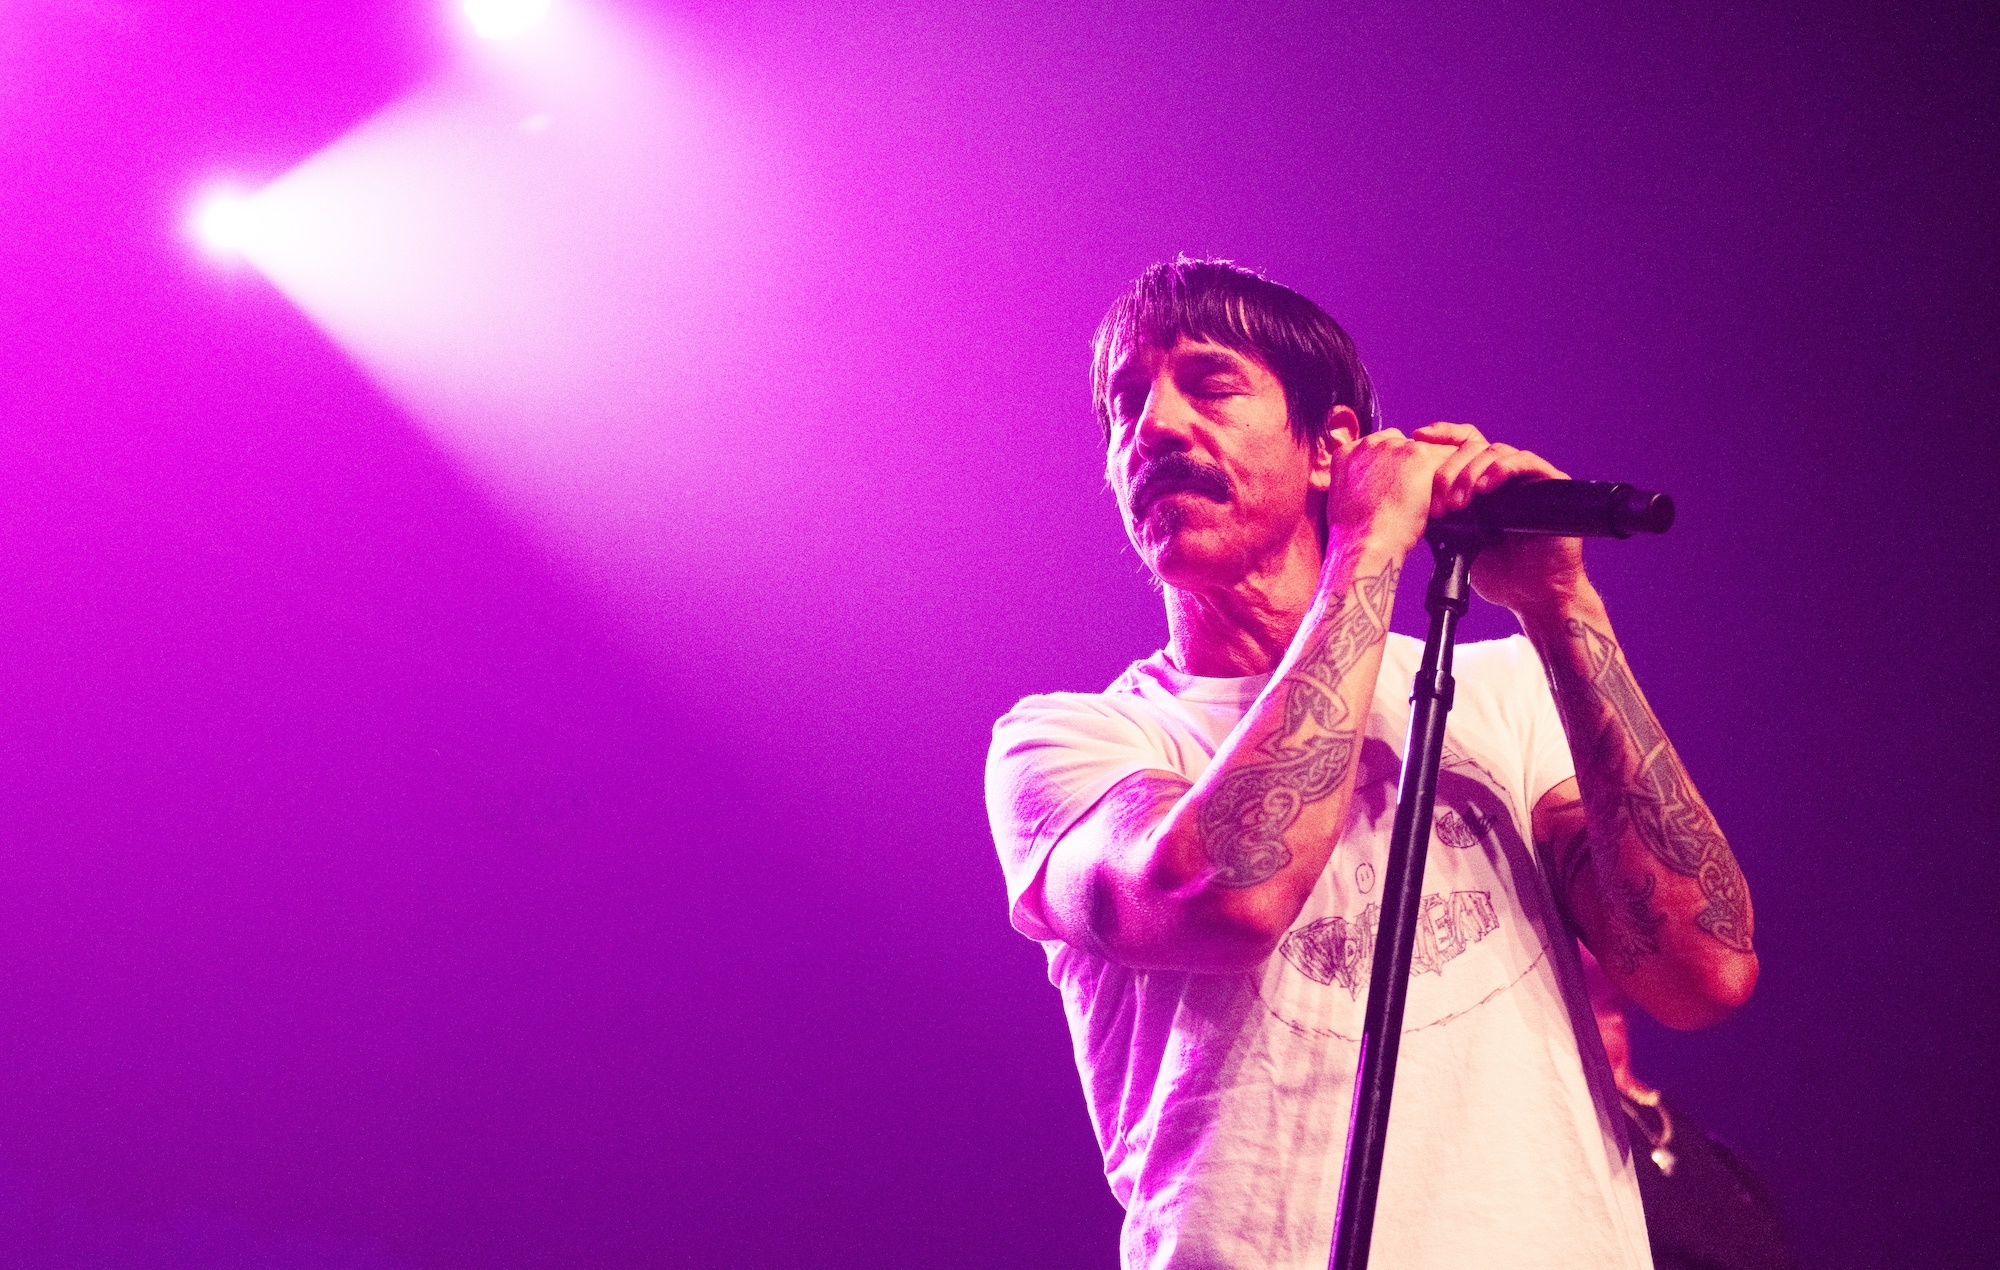 Anthony Kiedis, Red Hot Chili Peppers, New single release, Music news, 2000x1270 HD Desktop